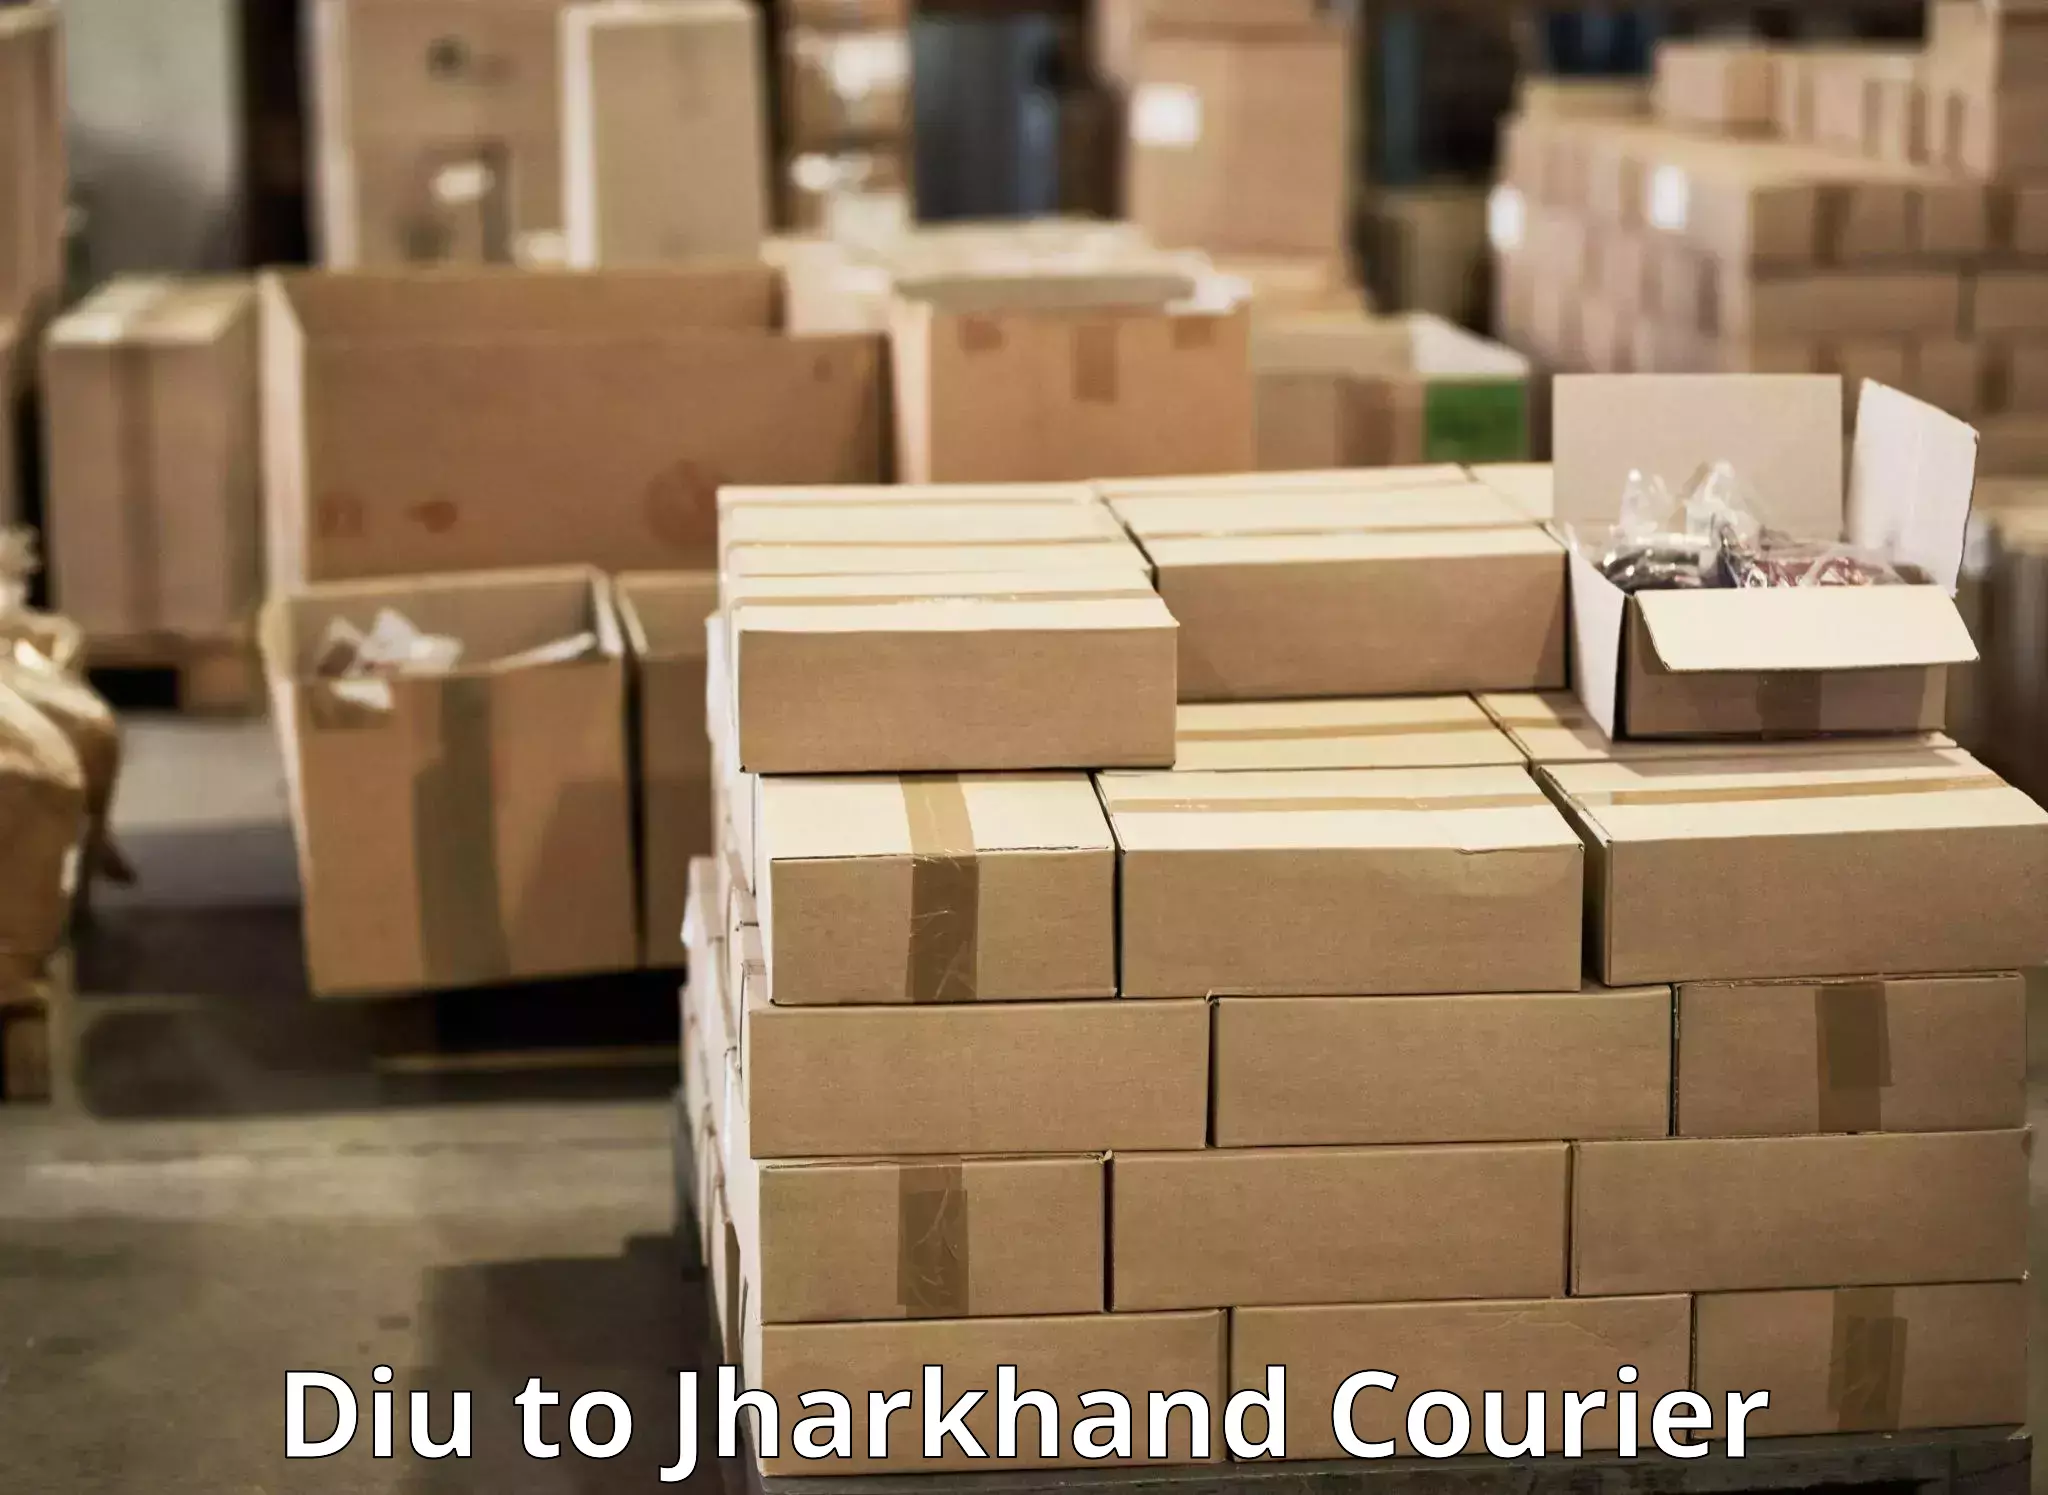 Round-the-clock parcel delivery Diu to Bagodar